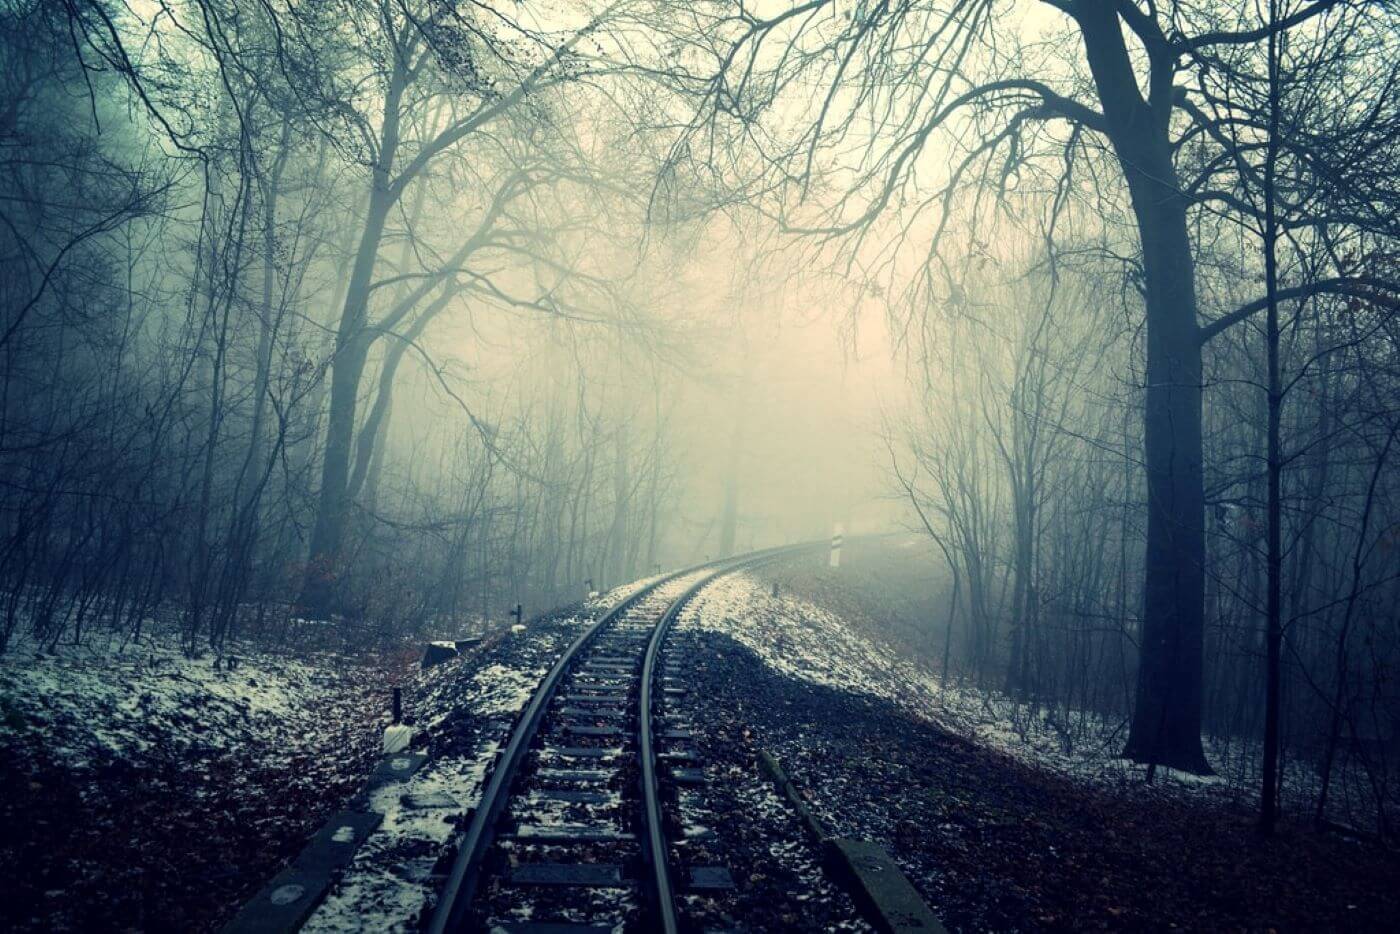 Another one of our spooky spots to visit, a dark railroad at night